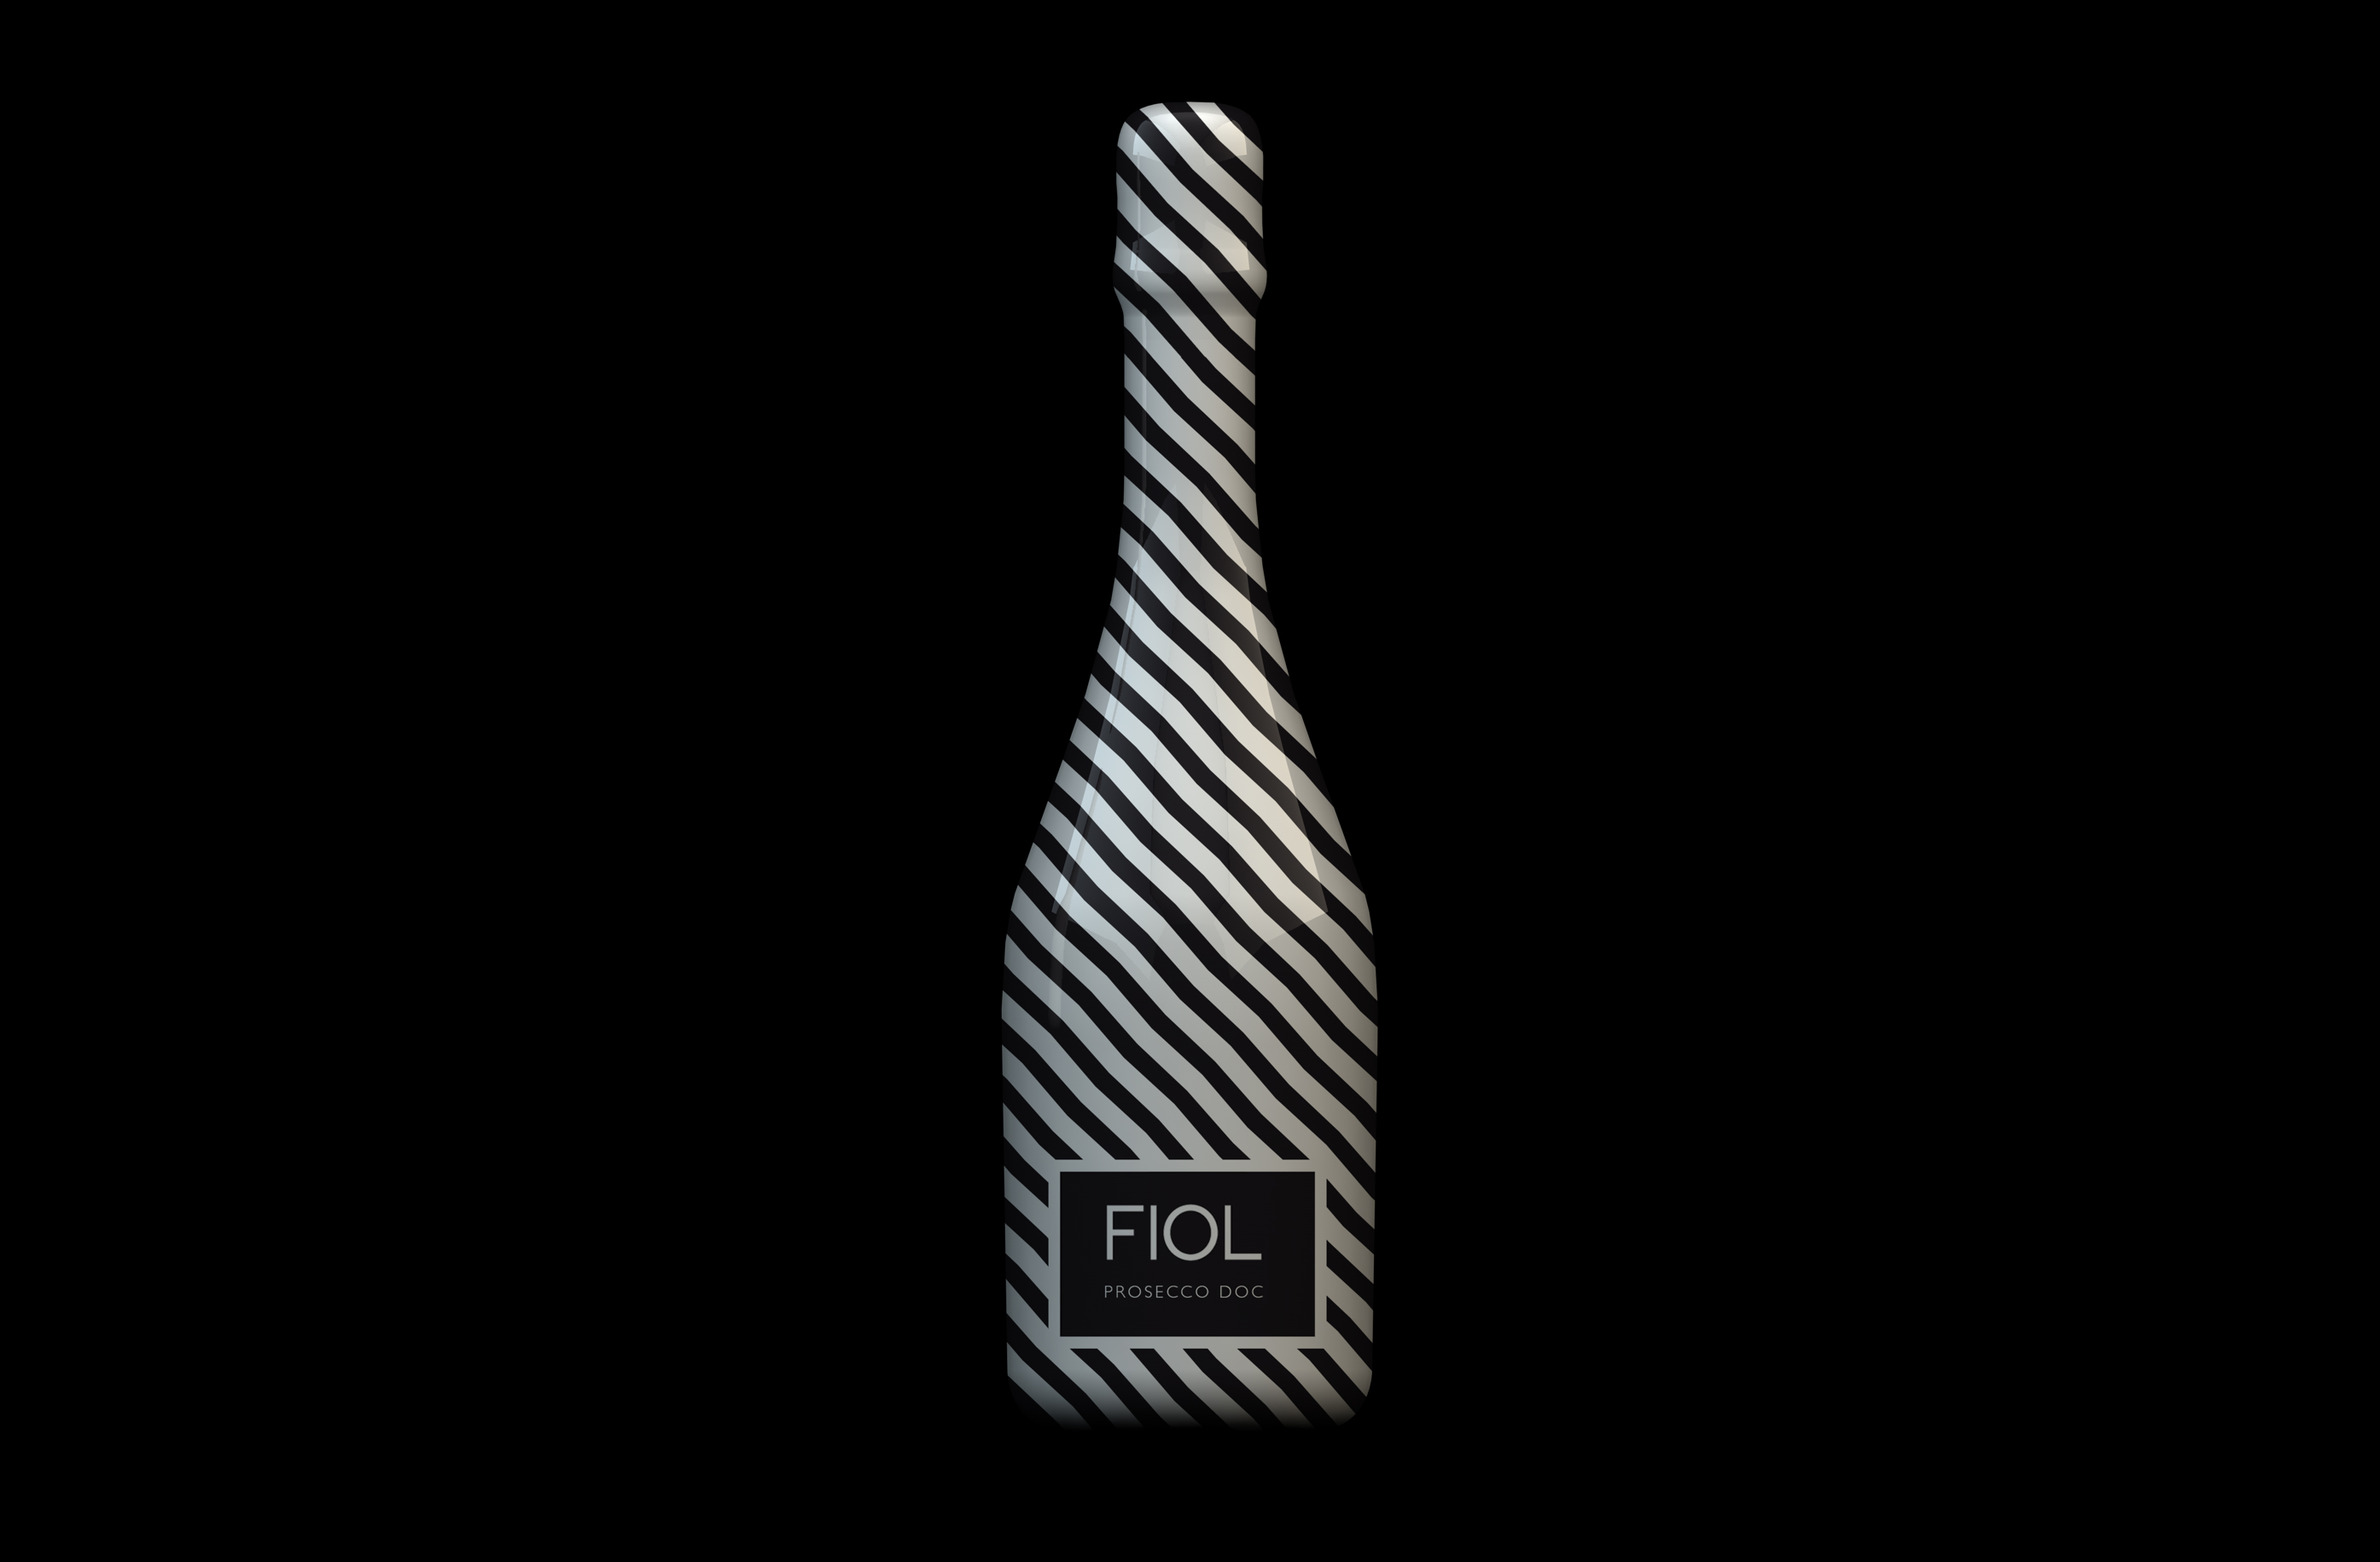 Bottle_Prosecco_Fiol_Audric_Dandres_Plus_Minus_Brand_Identity_Limited_Edition